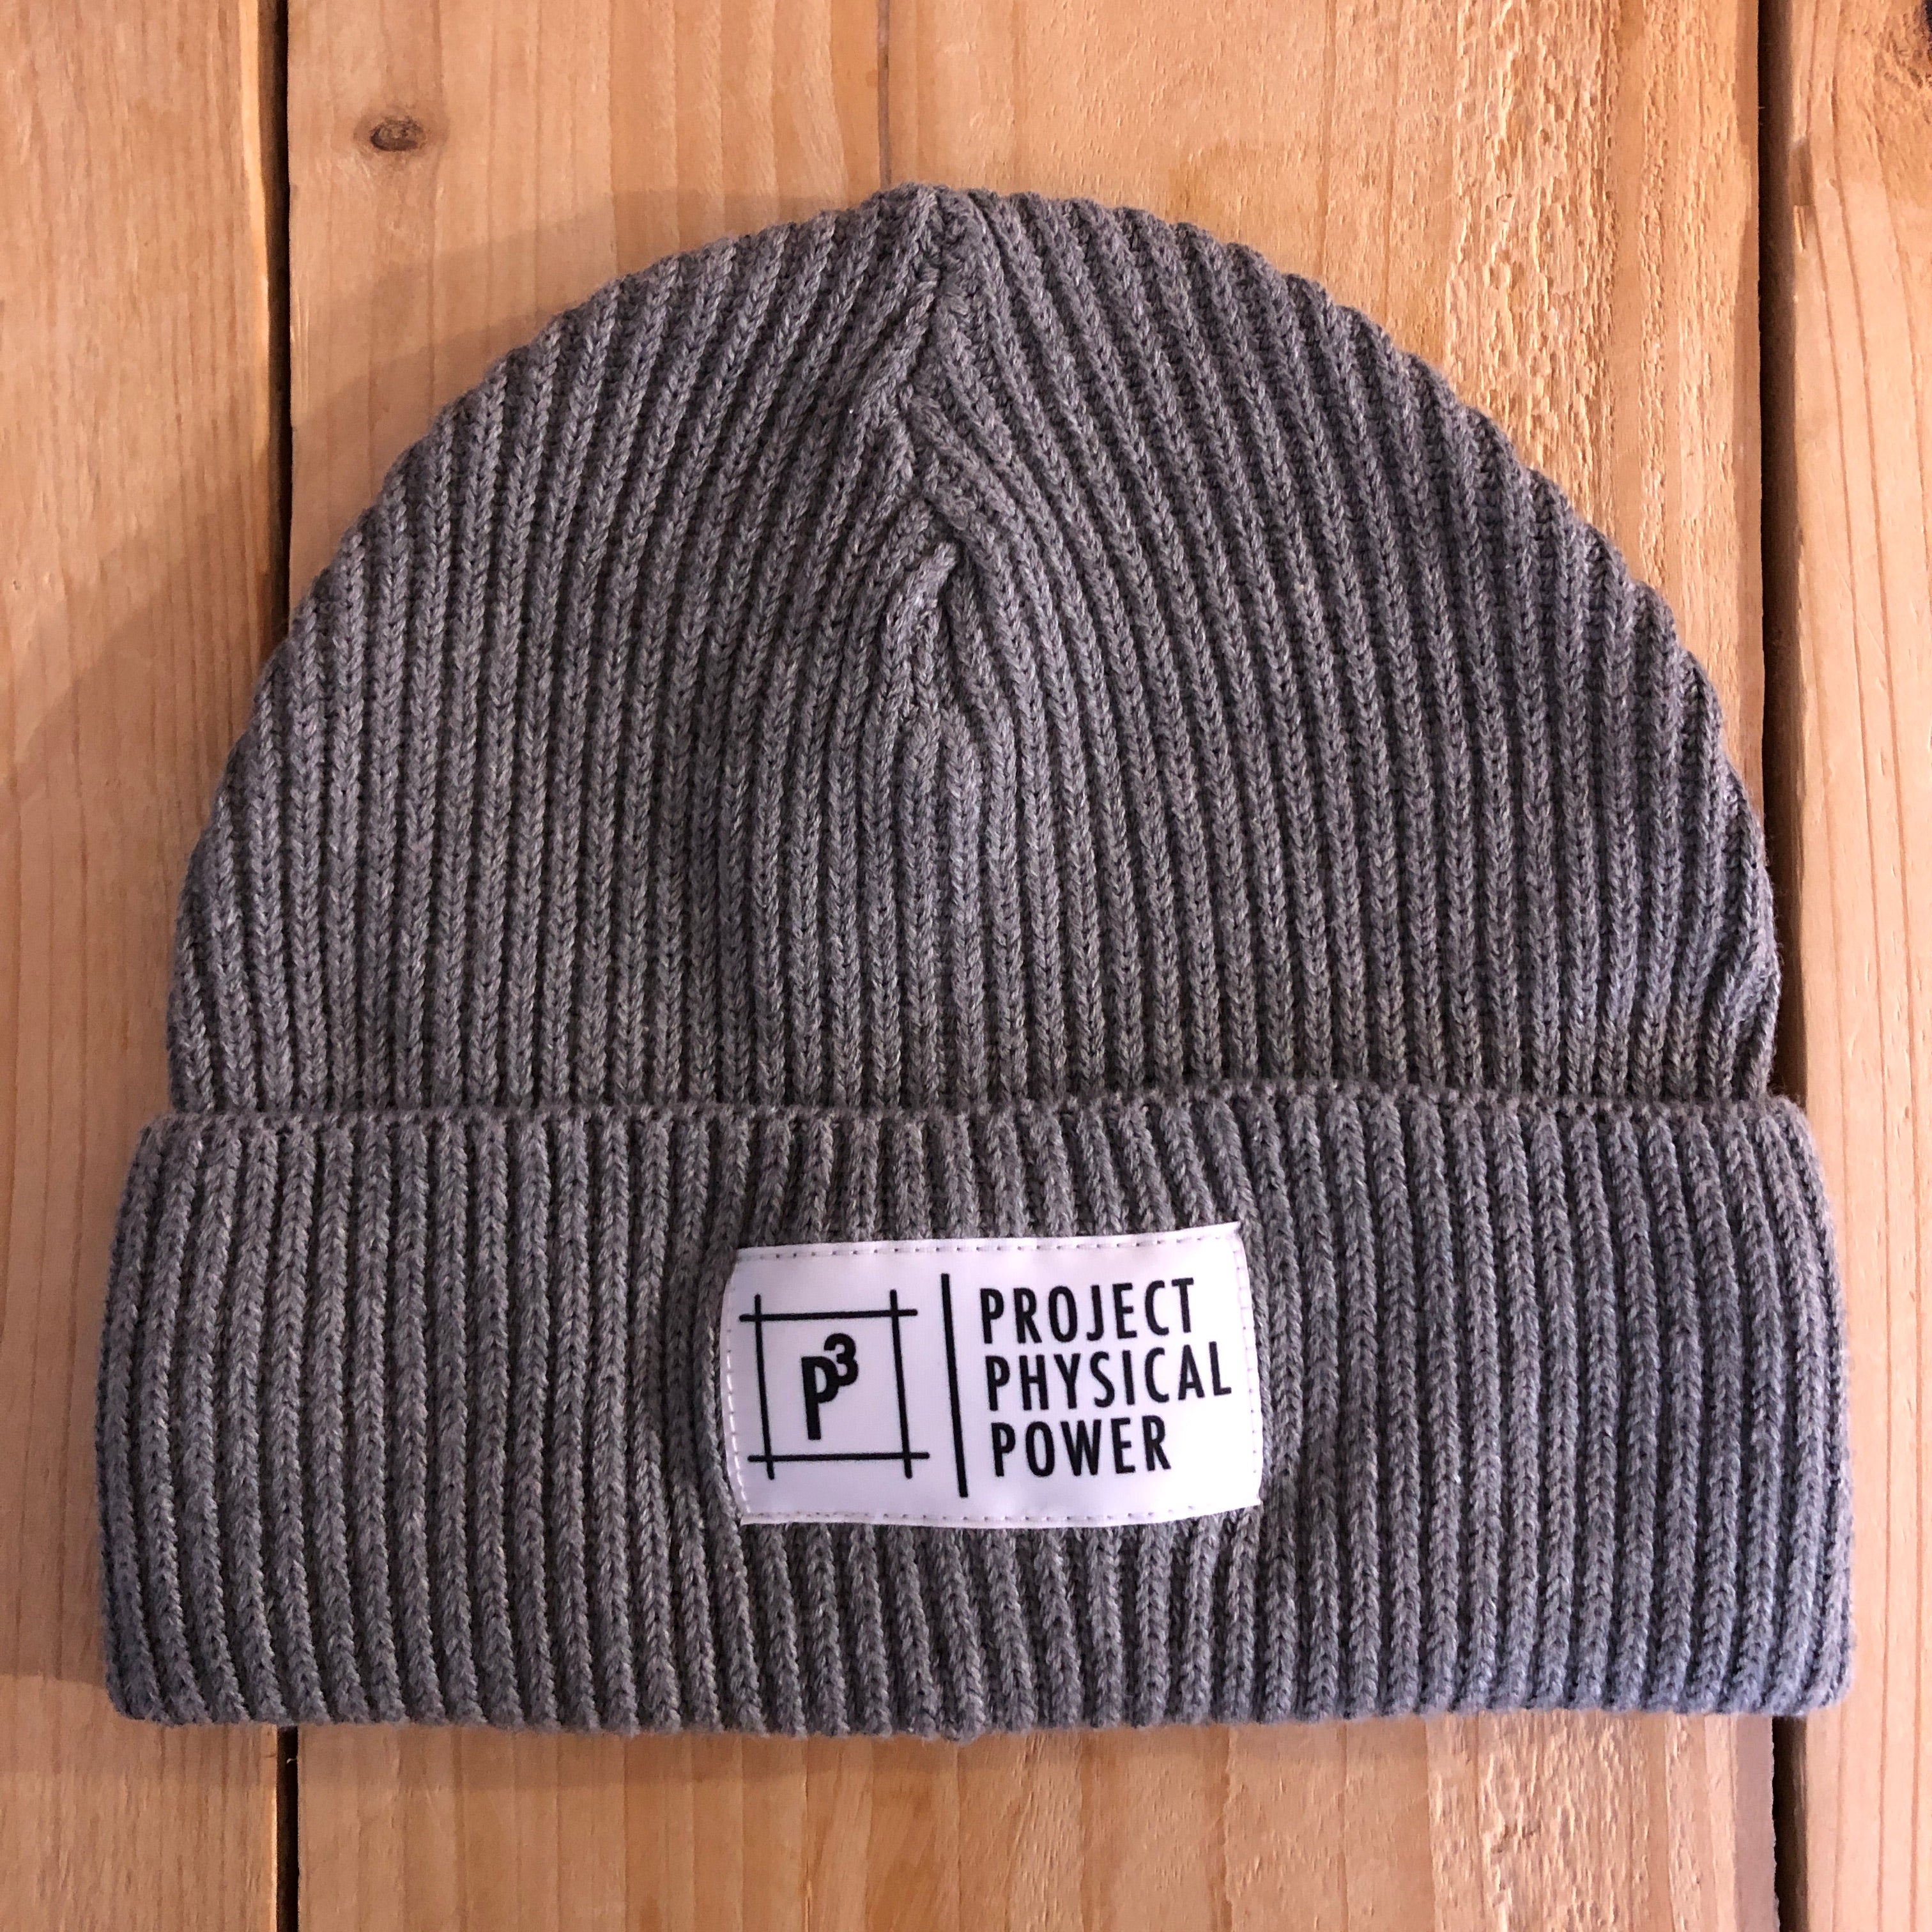 Project Physical Power - P3 Beanie